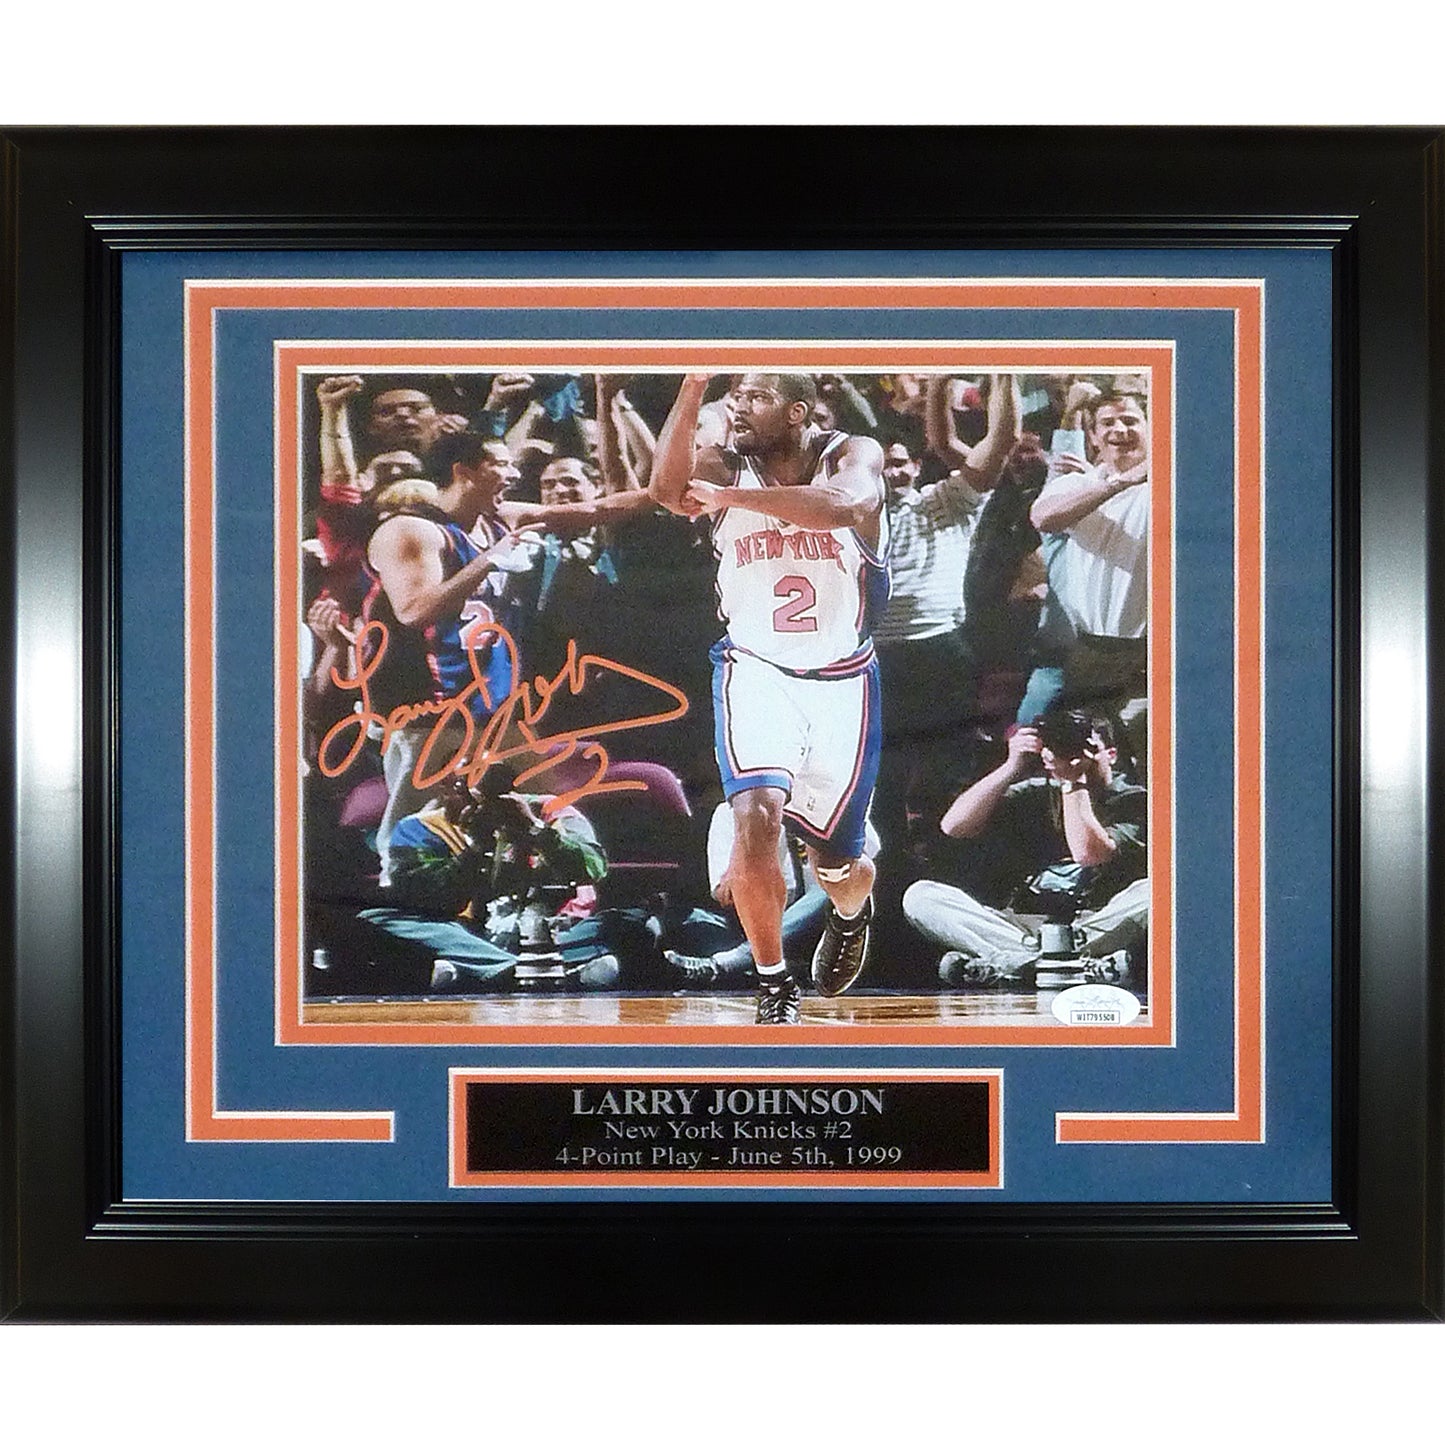 Larry Johnson Autographed New York Knicks (4-Point Play) Deluxe Framed 8x10 Photo - JSA